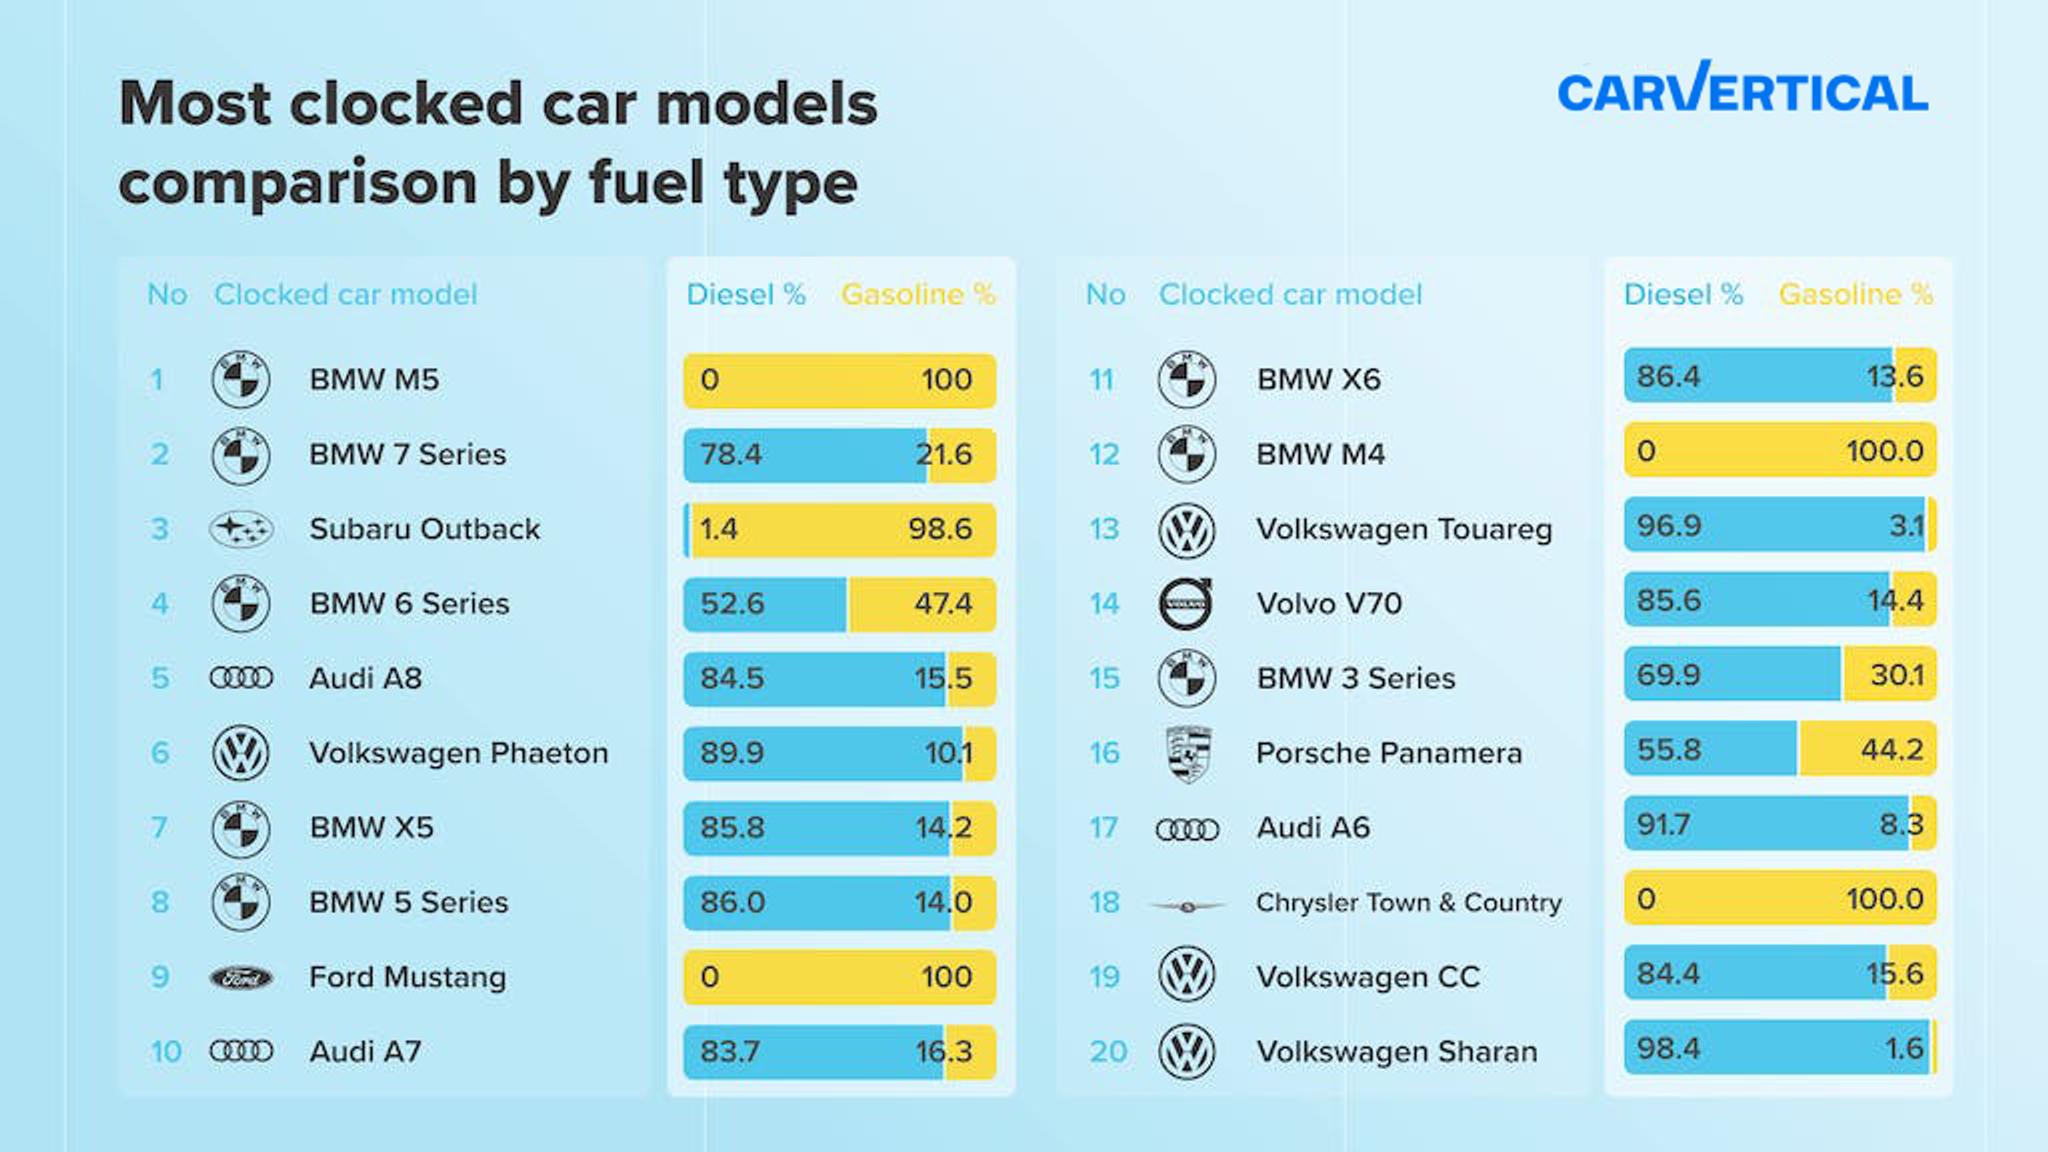 Most clocked car models comparison by fuel type